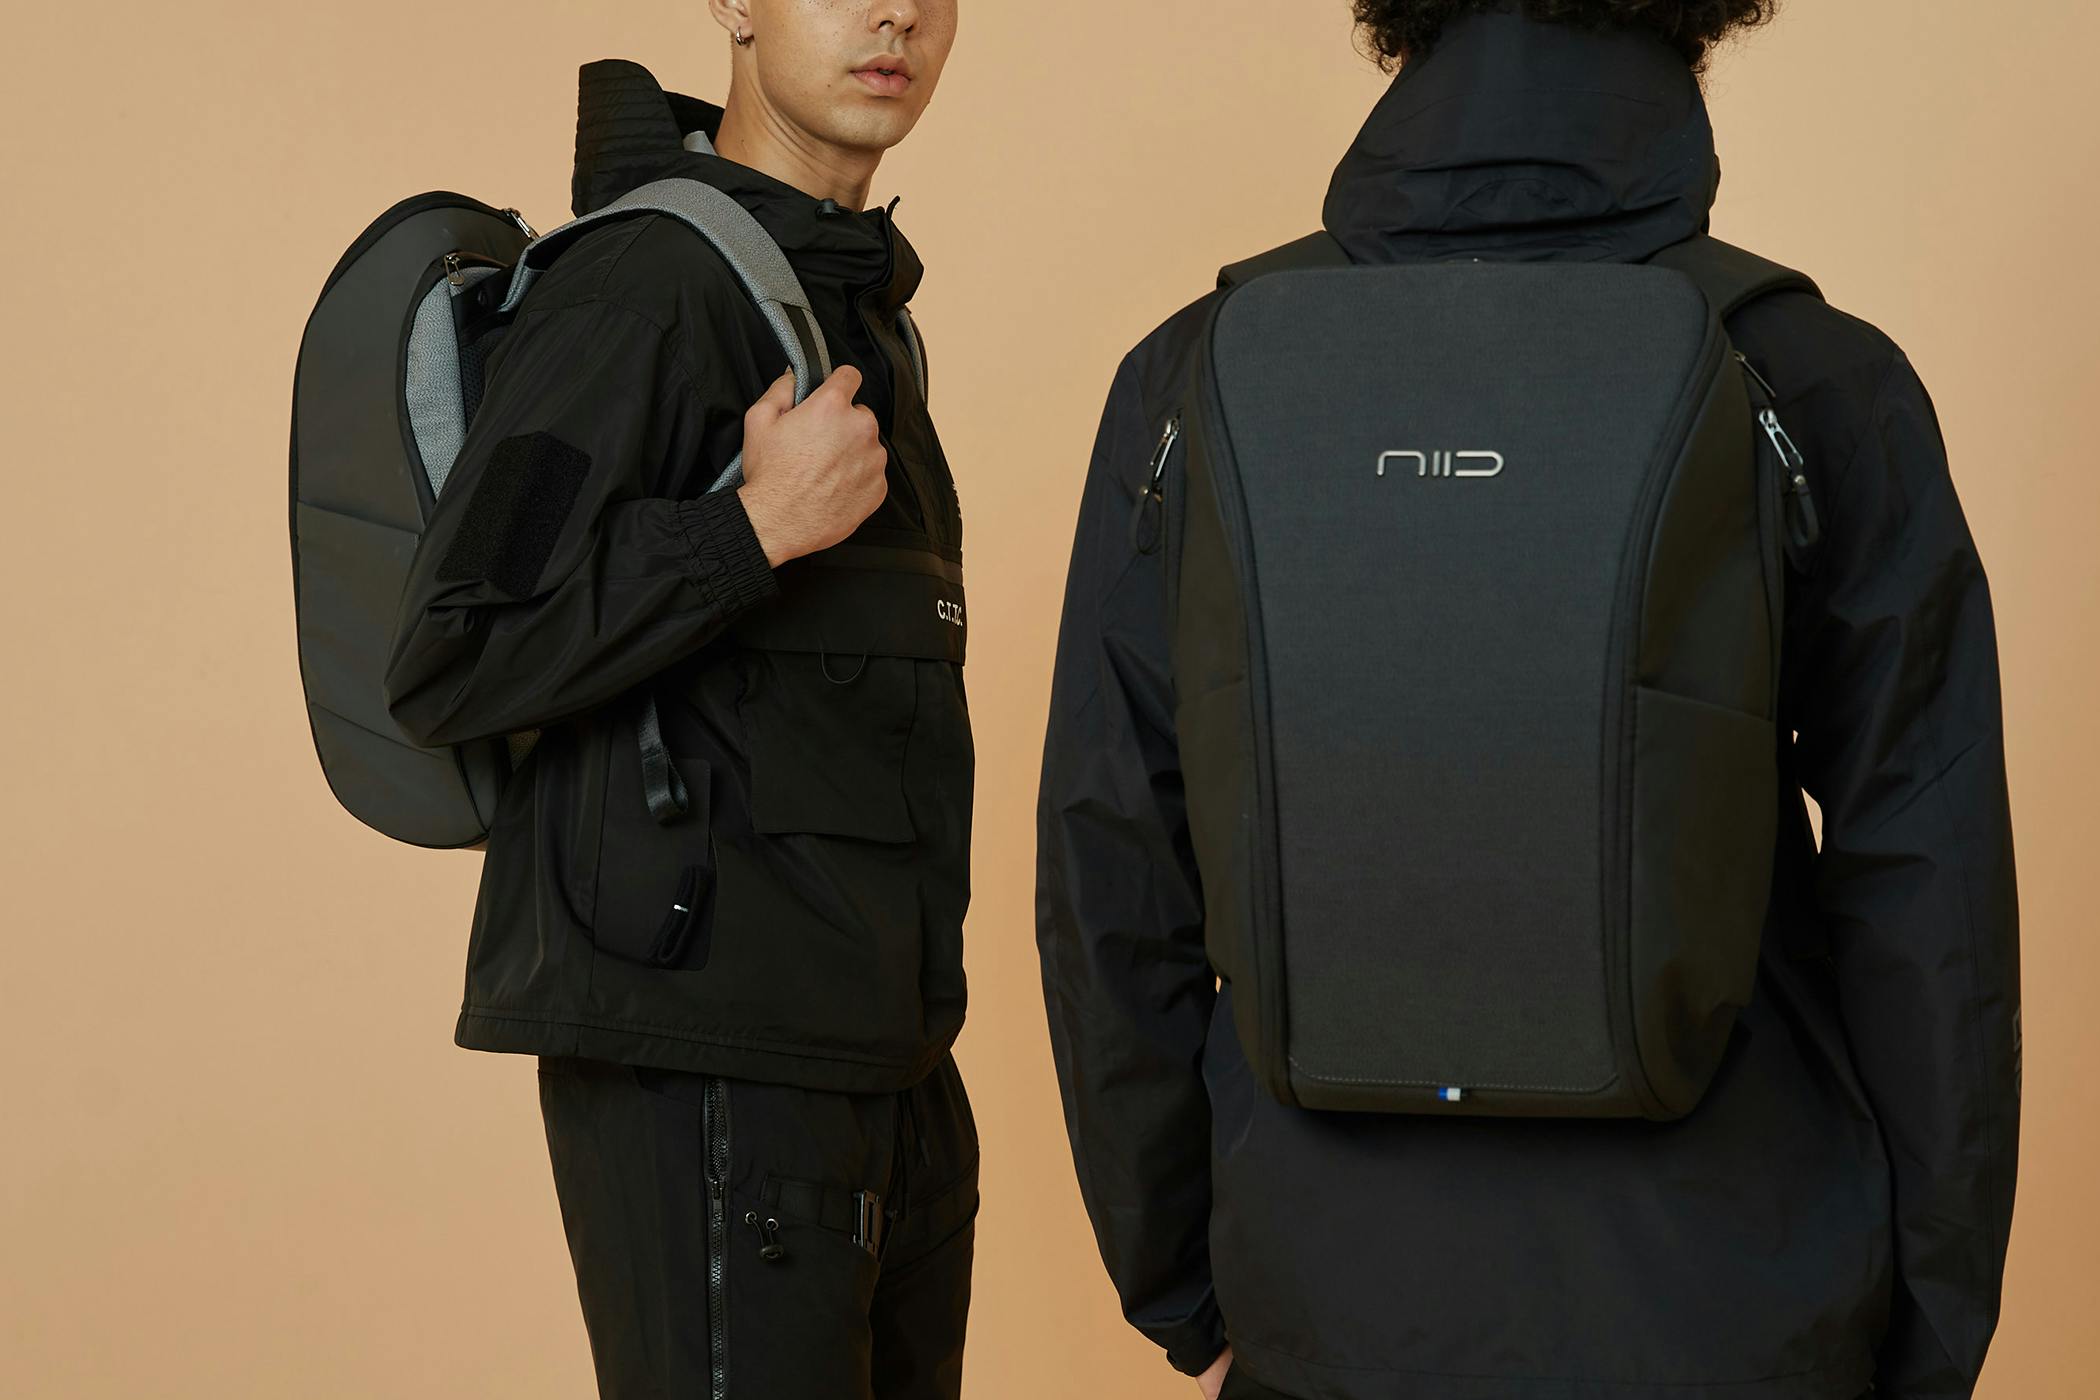 NIID DECODE BACKPACK 18L ニード バックパック